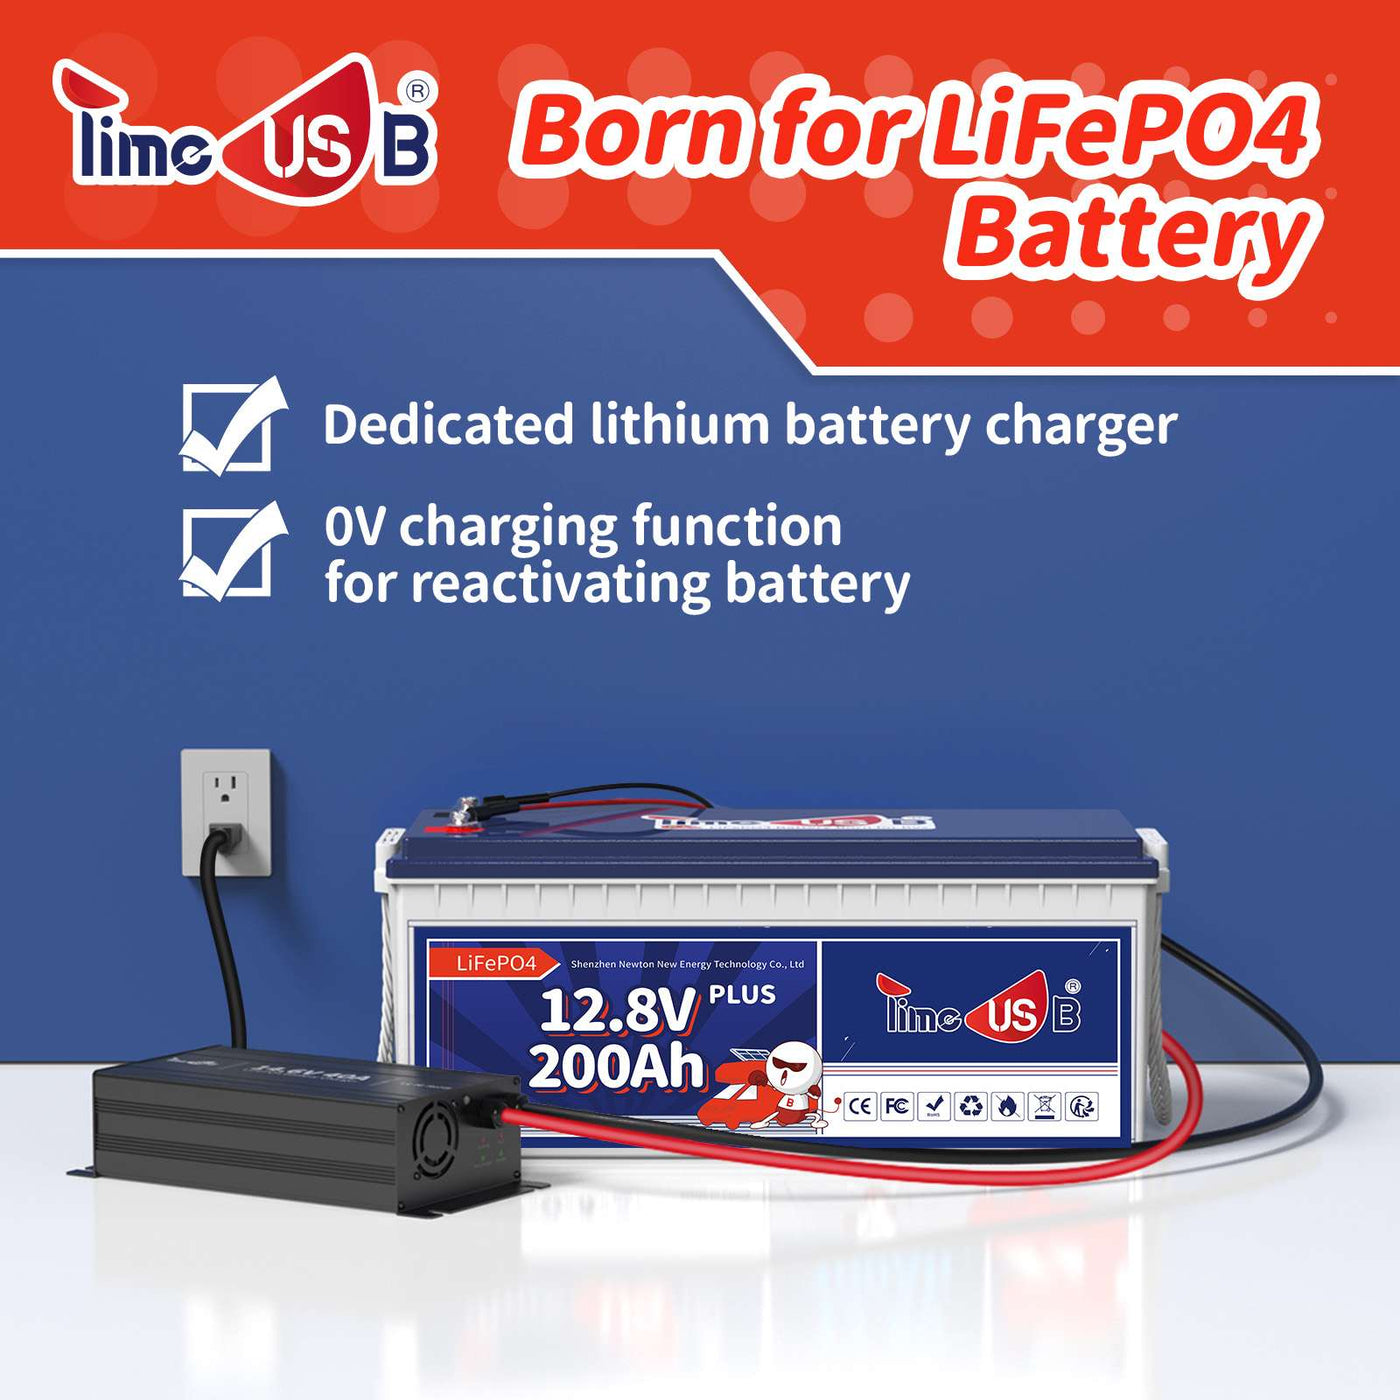 Timeusb 14.6V 40A Fast Charging LiFePO4 Battery Charger